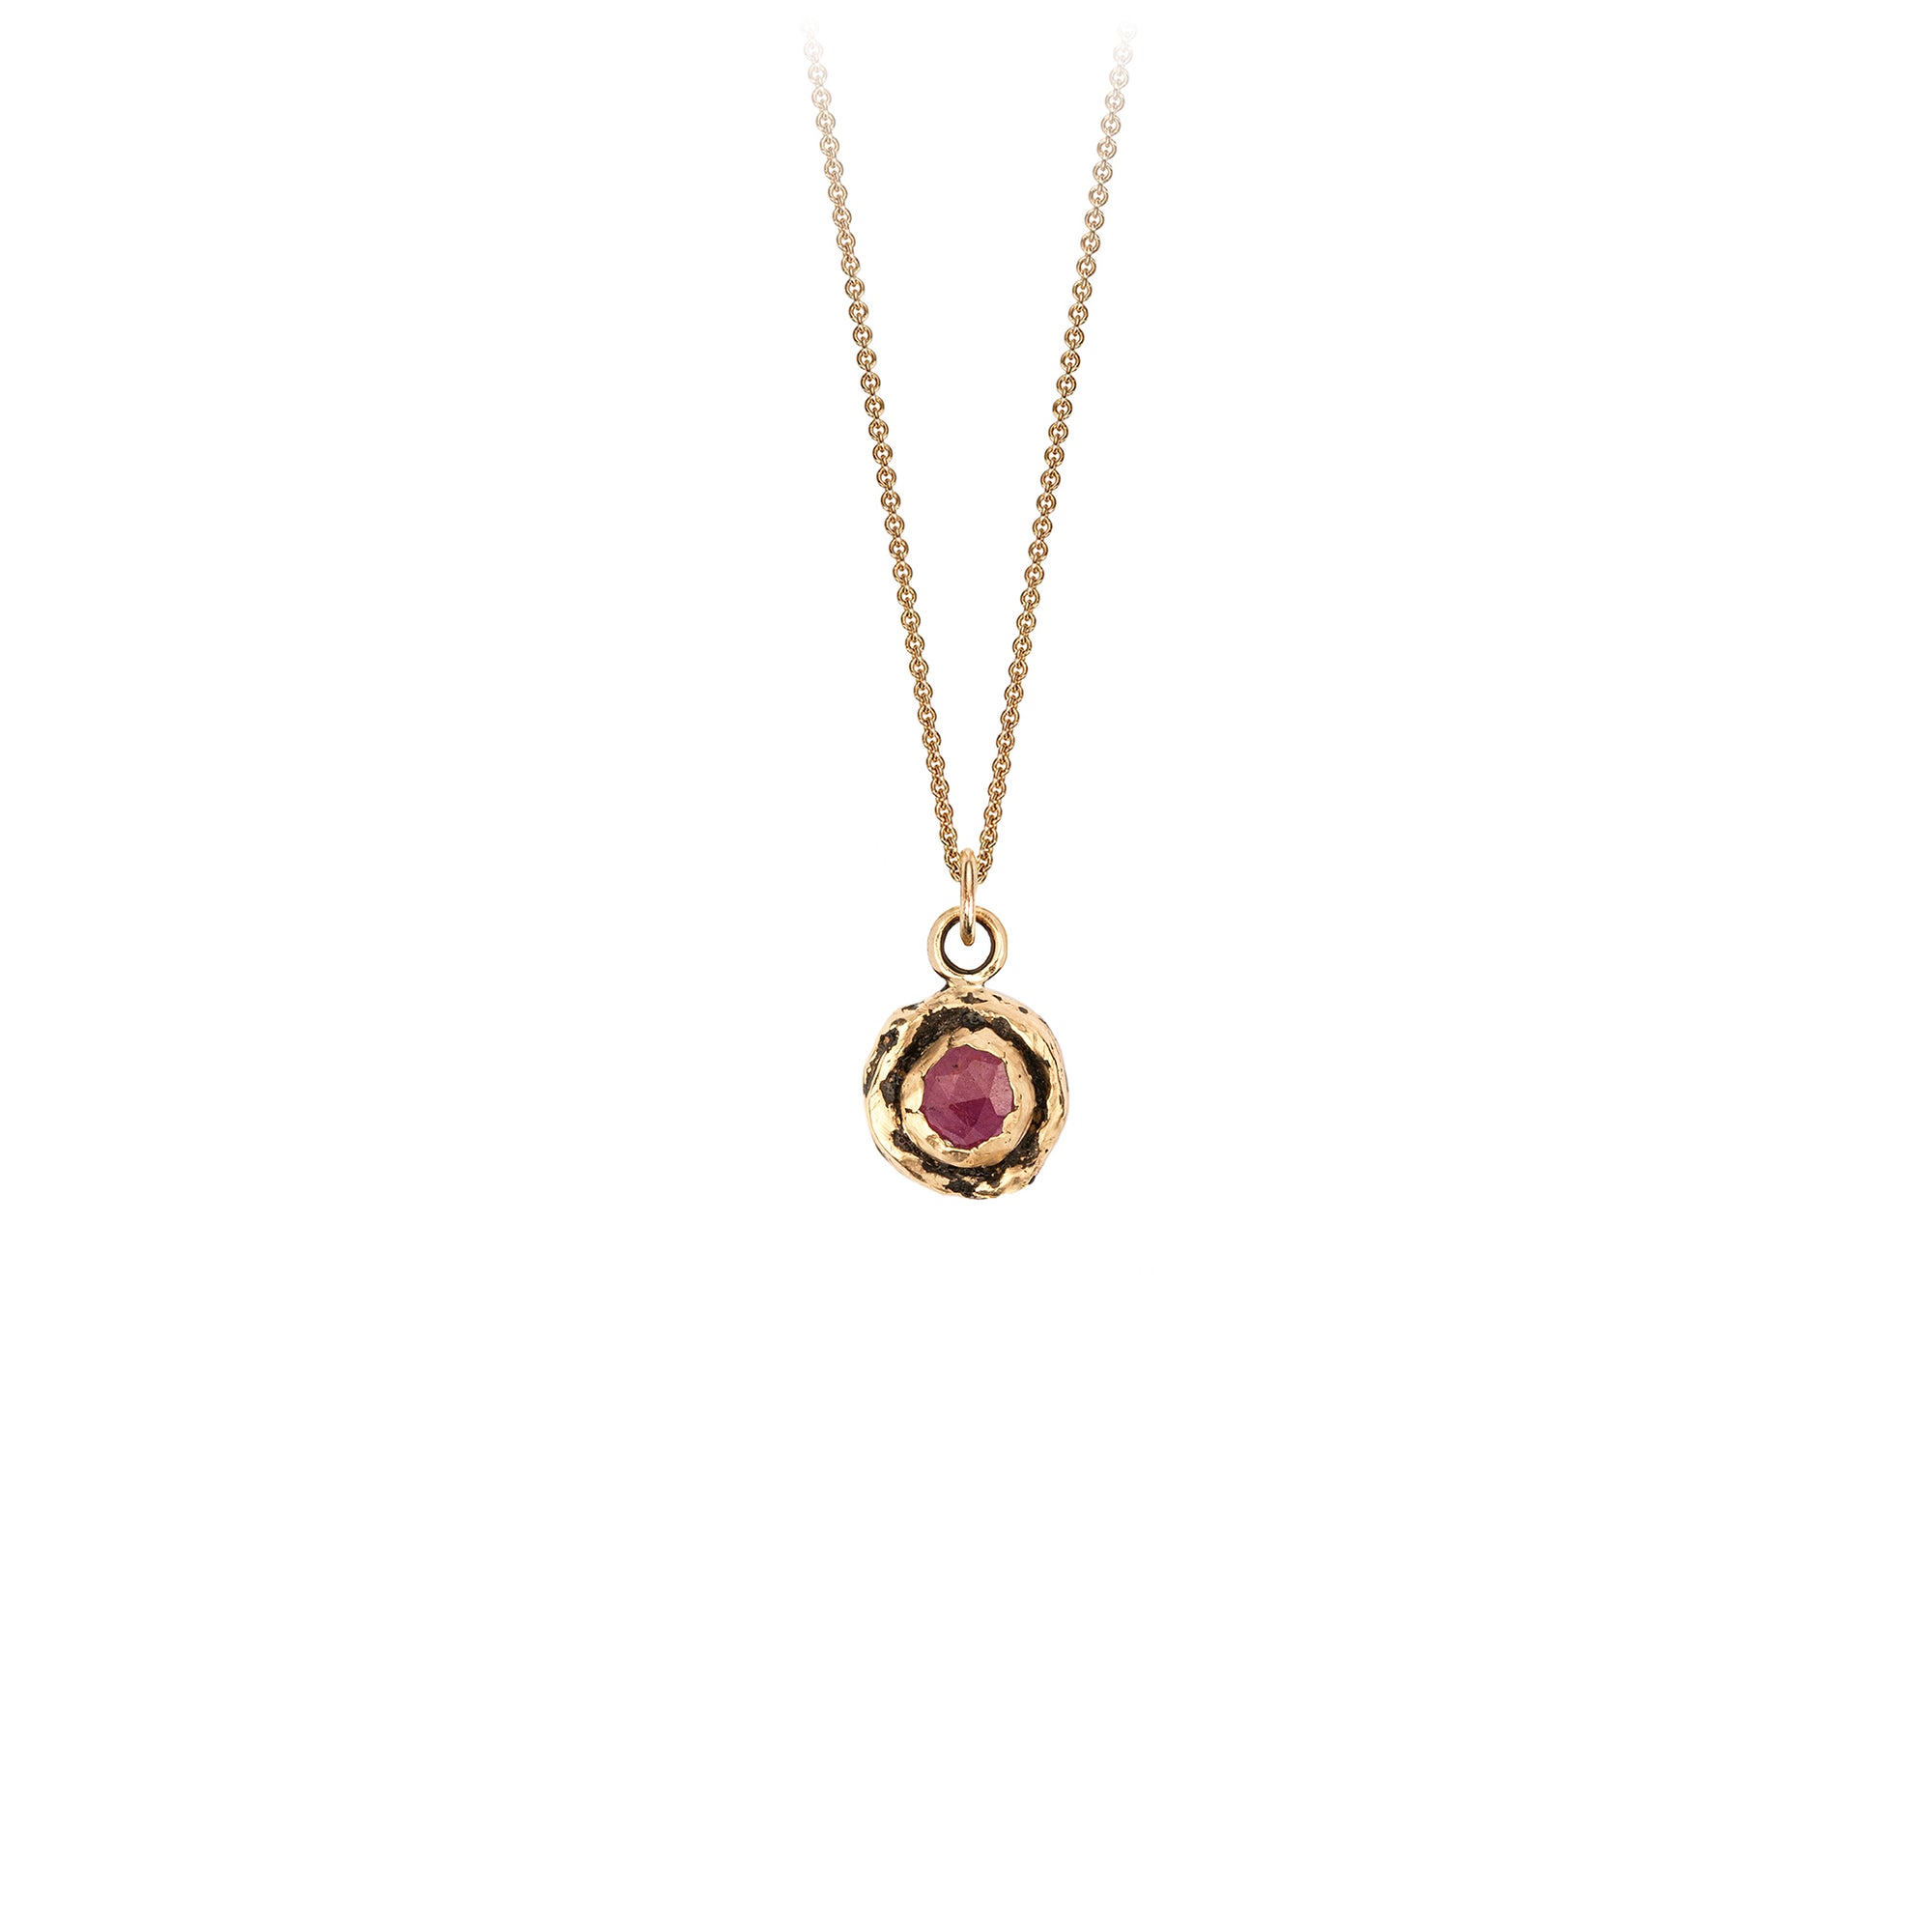 Shop For Best Ruby Necklace From Widest Range Online